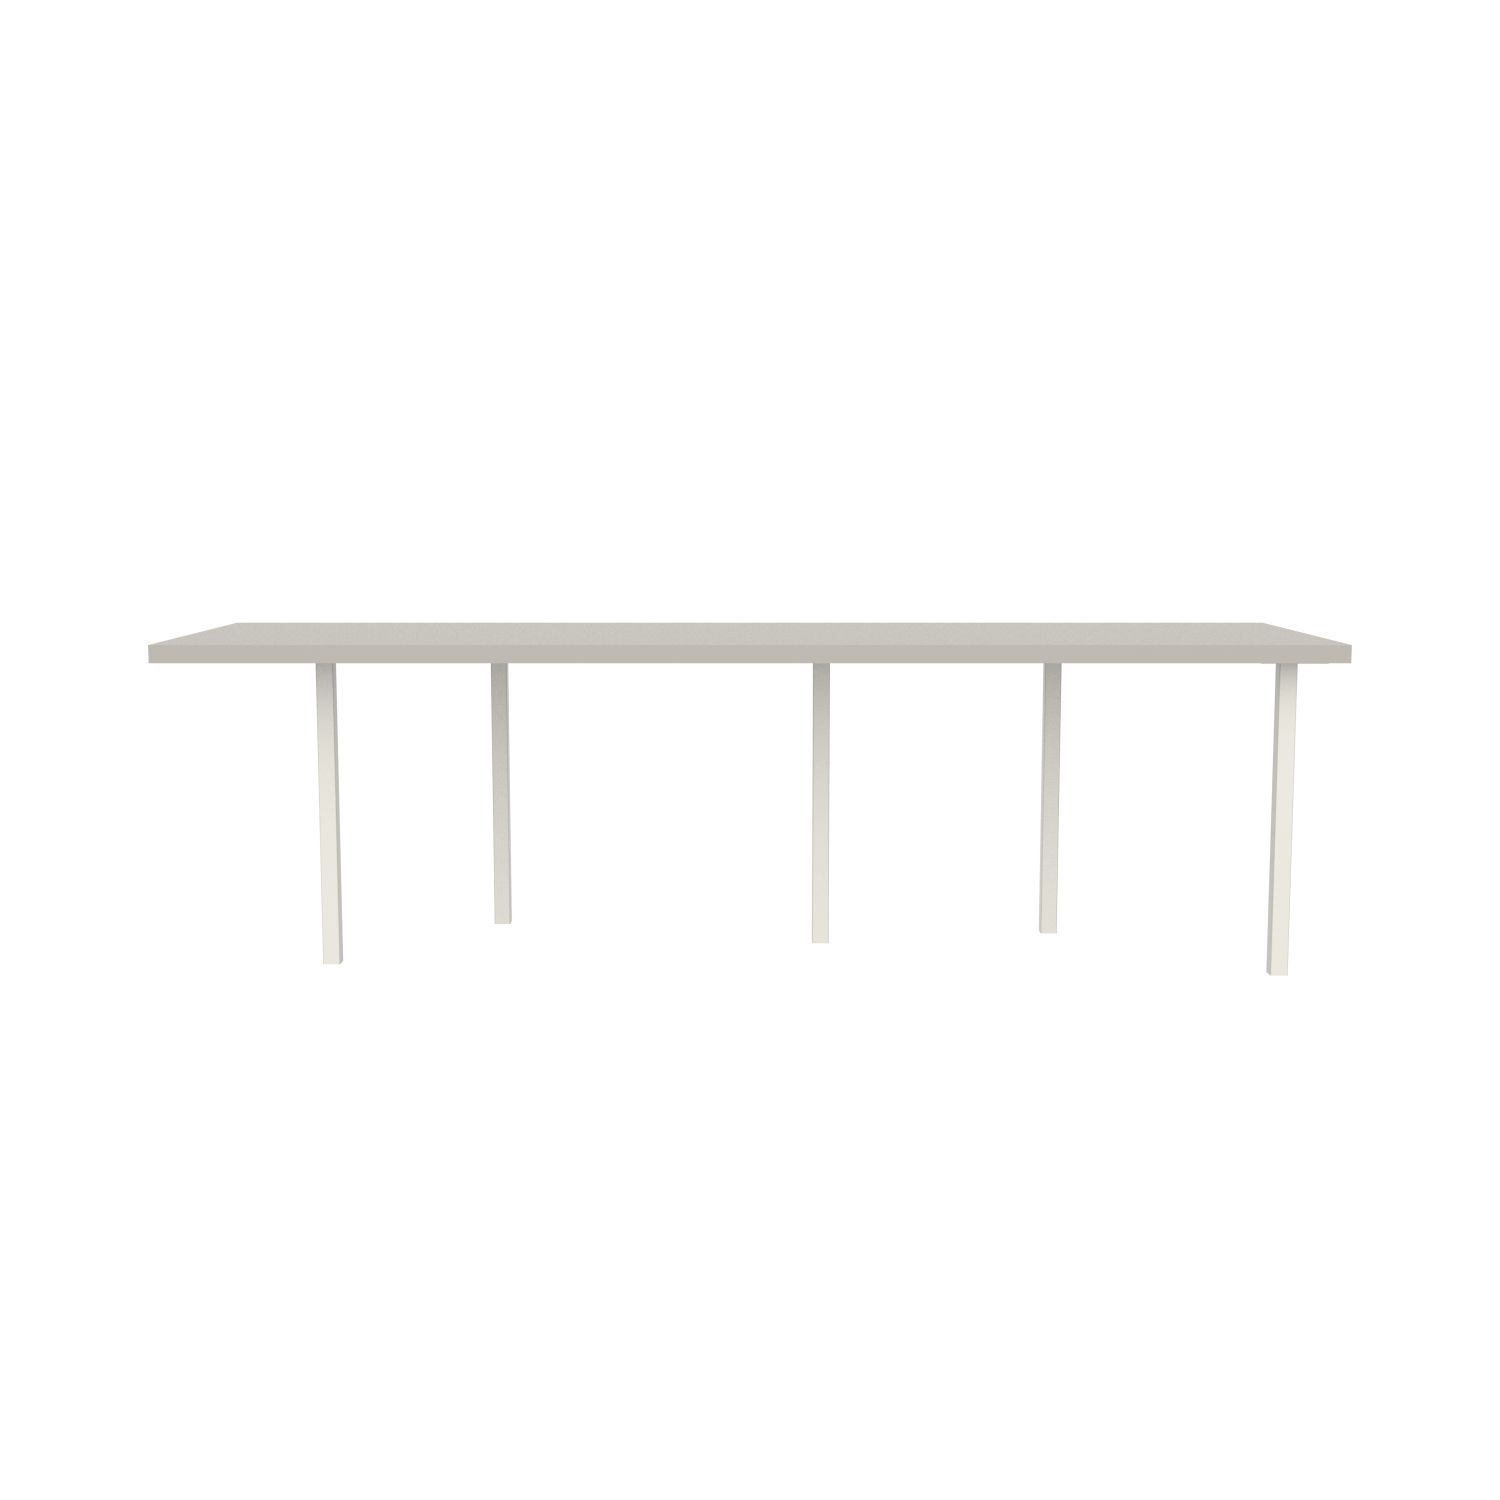 lensvelt bbrand table five fixed heigt 80x264 hpl white 50 mm price level 1 white ral9010